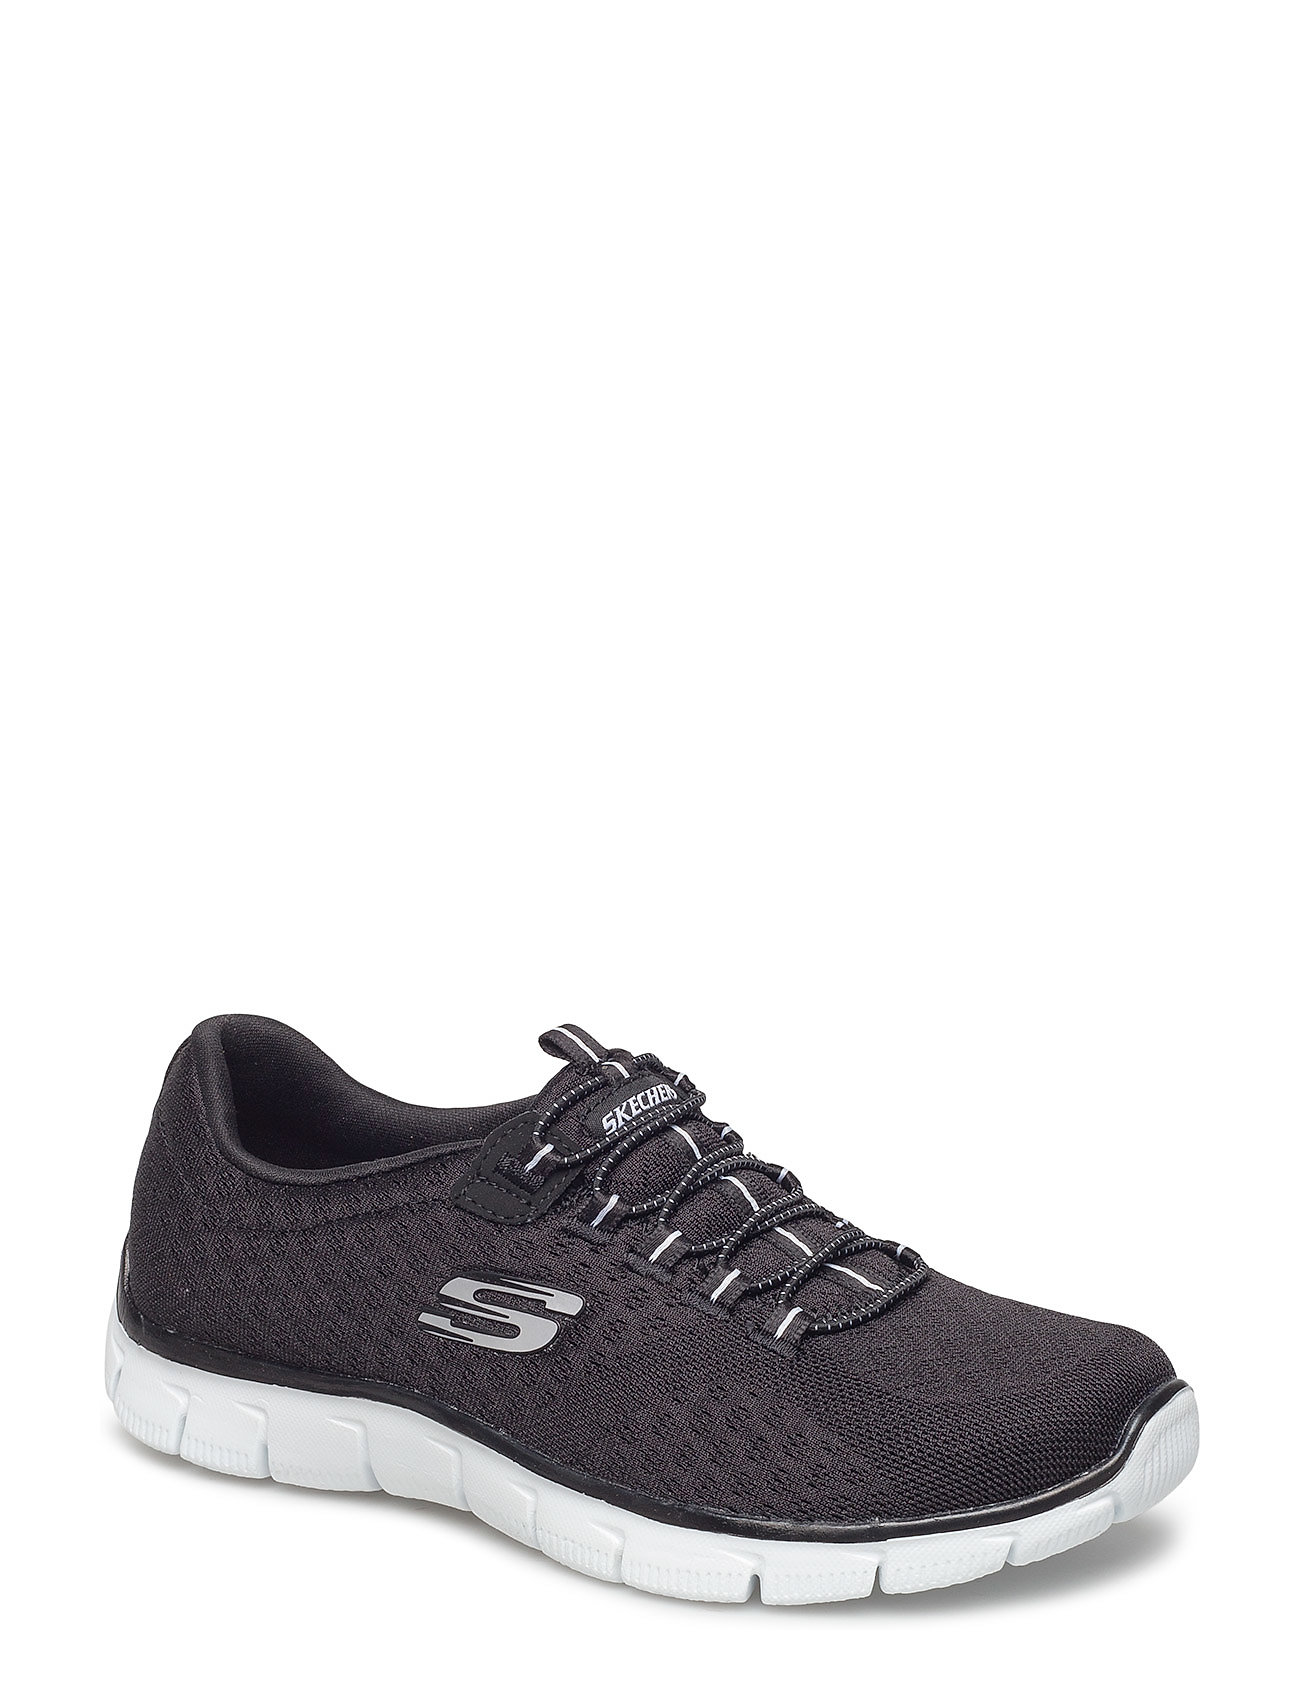 Skechers Womens Relaxed Fit: Empire - Ocean View - Boozt.com